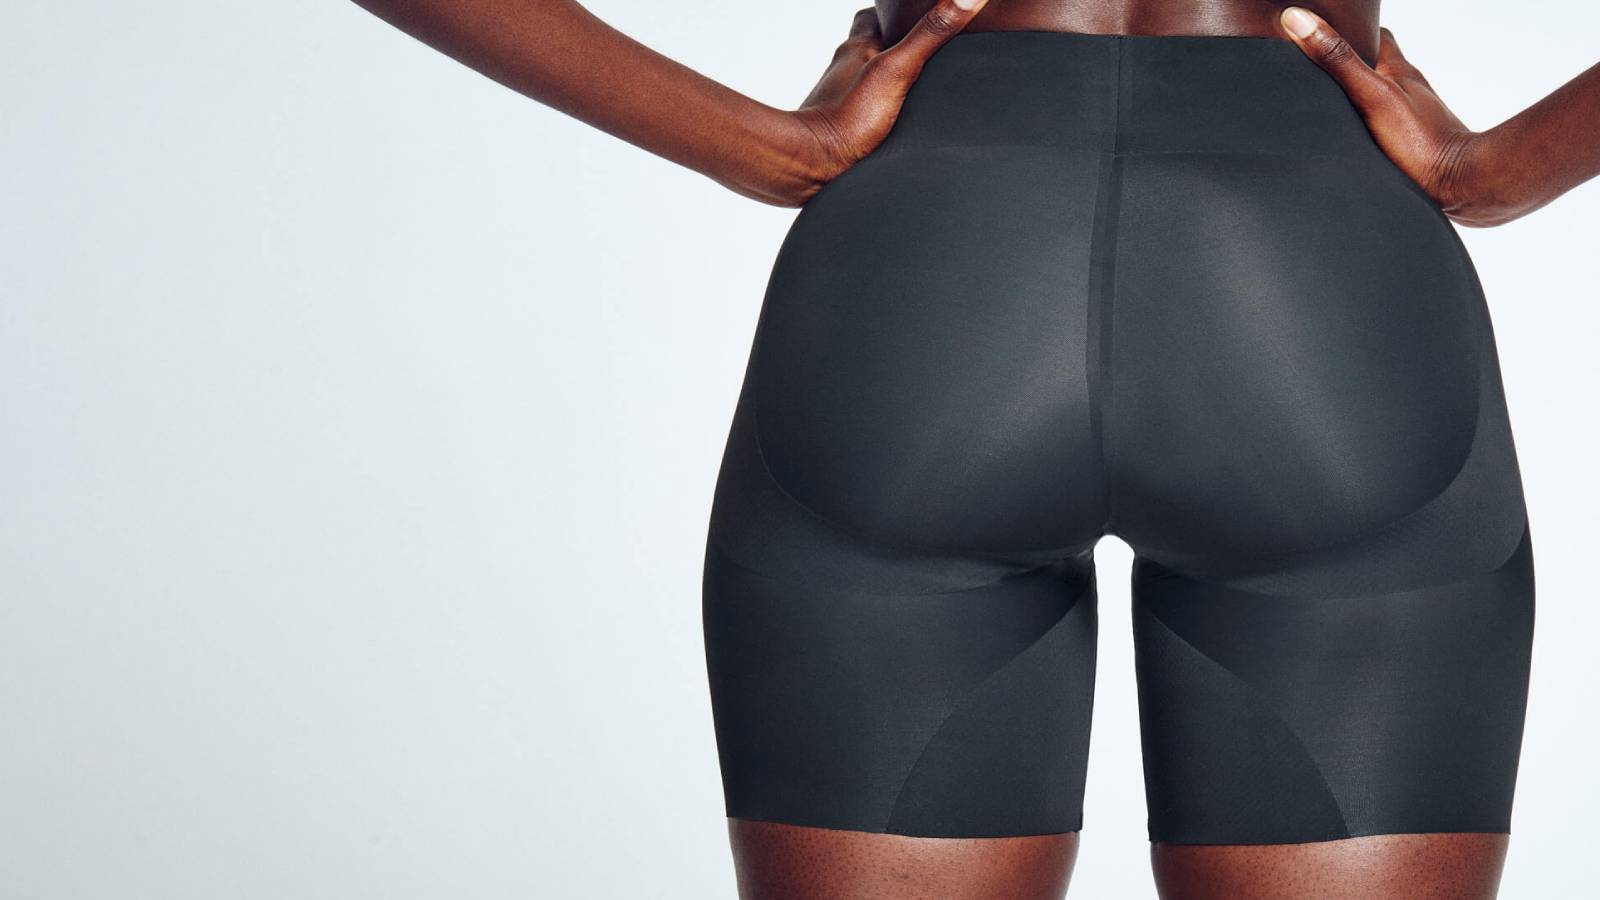 Heist The Highlight Shorts: Our go-to for slimming shapewear